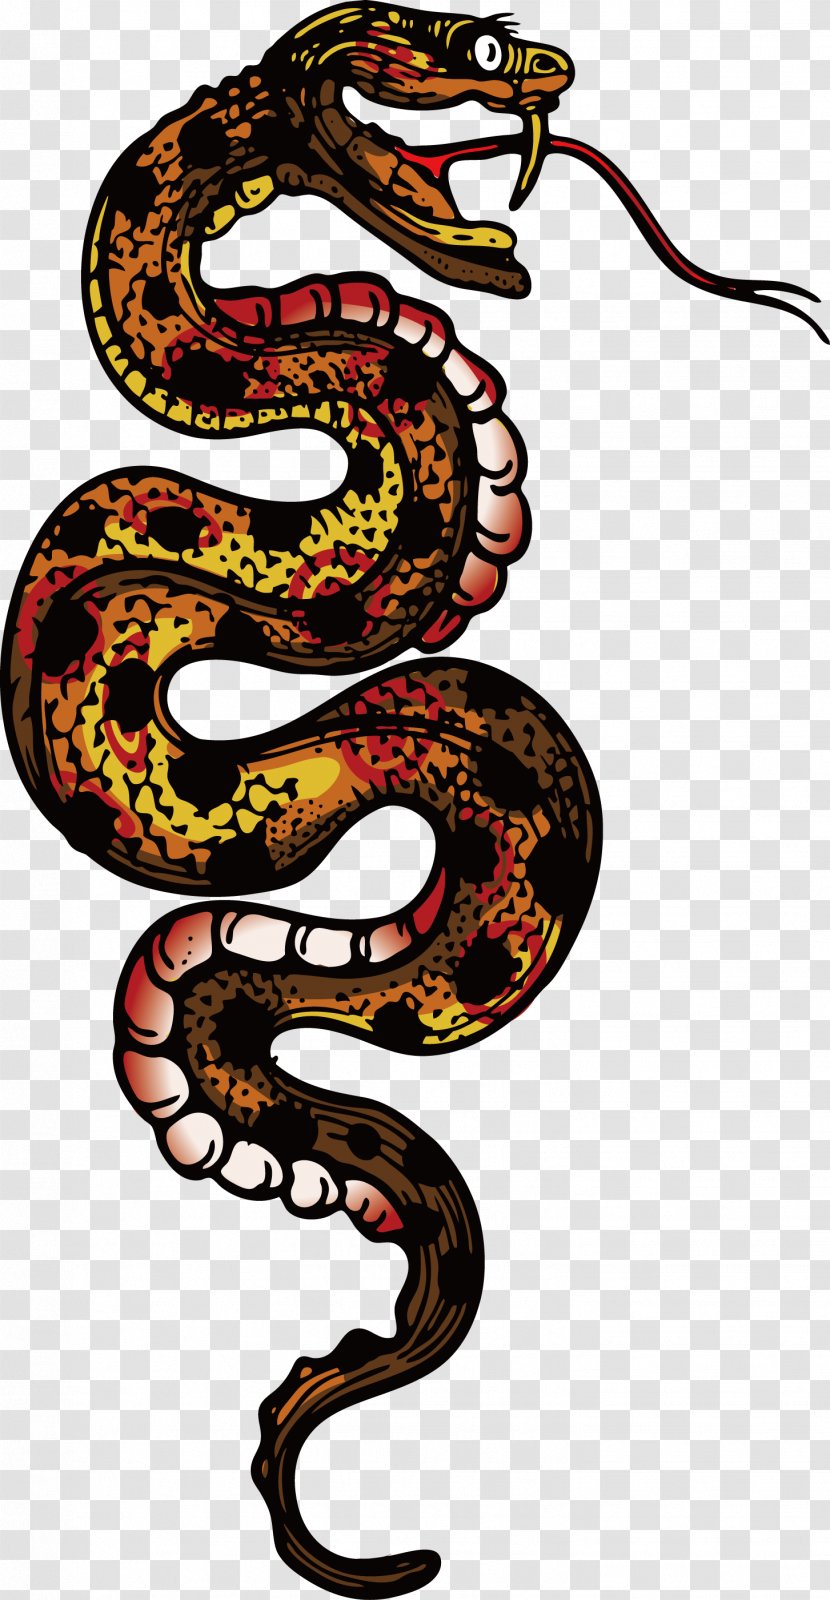 Boa Constrictor Vipers Kingsnakes - Serpent - Decorative Snakes Transparent PNG